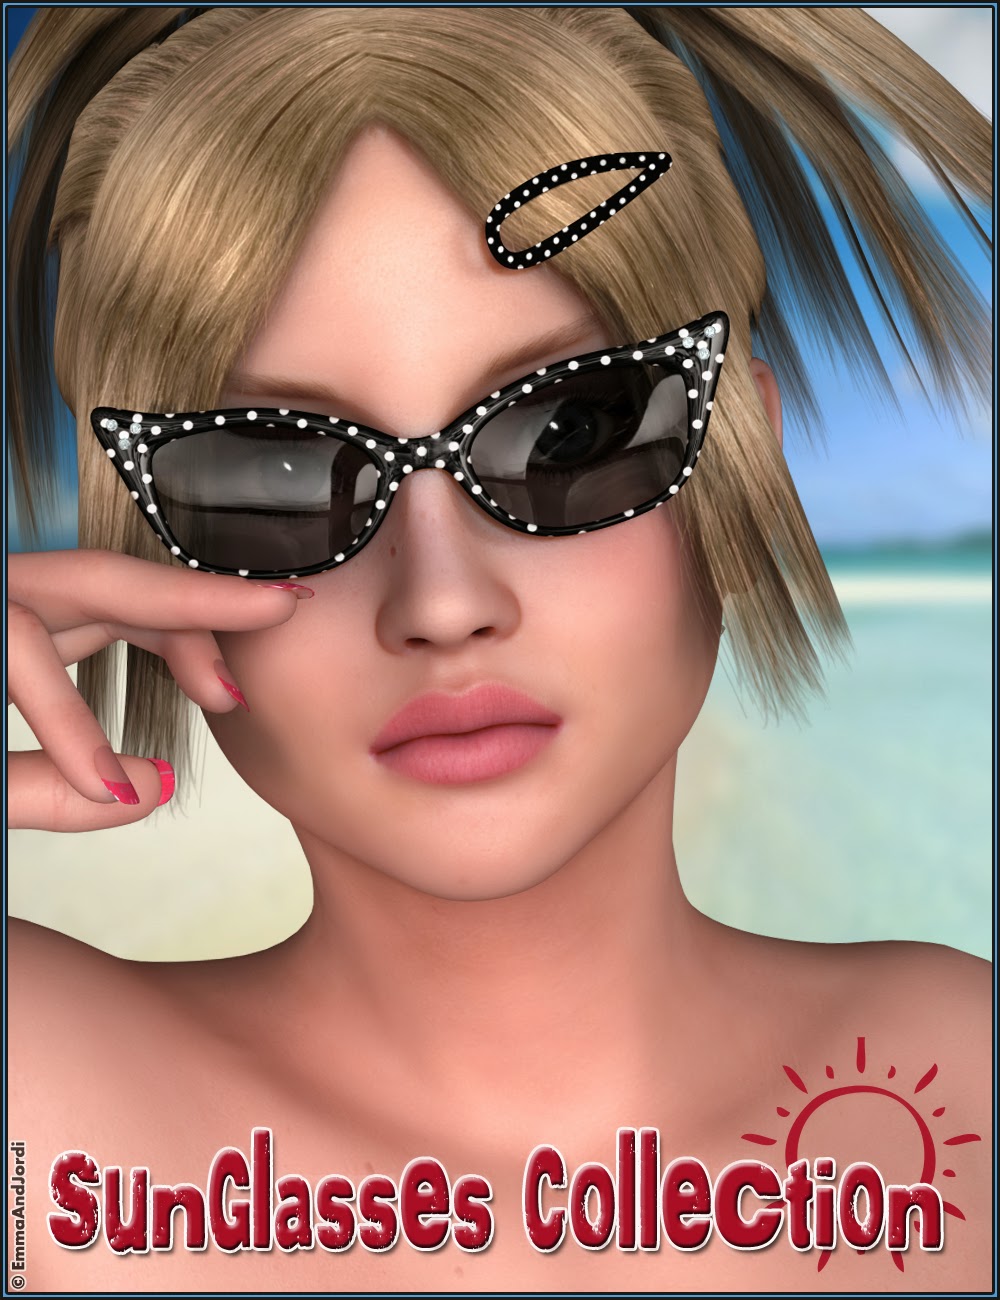 http://www.daz3d.com/new-releases/sunglasses-collection-for-any-figure